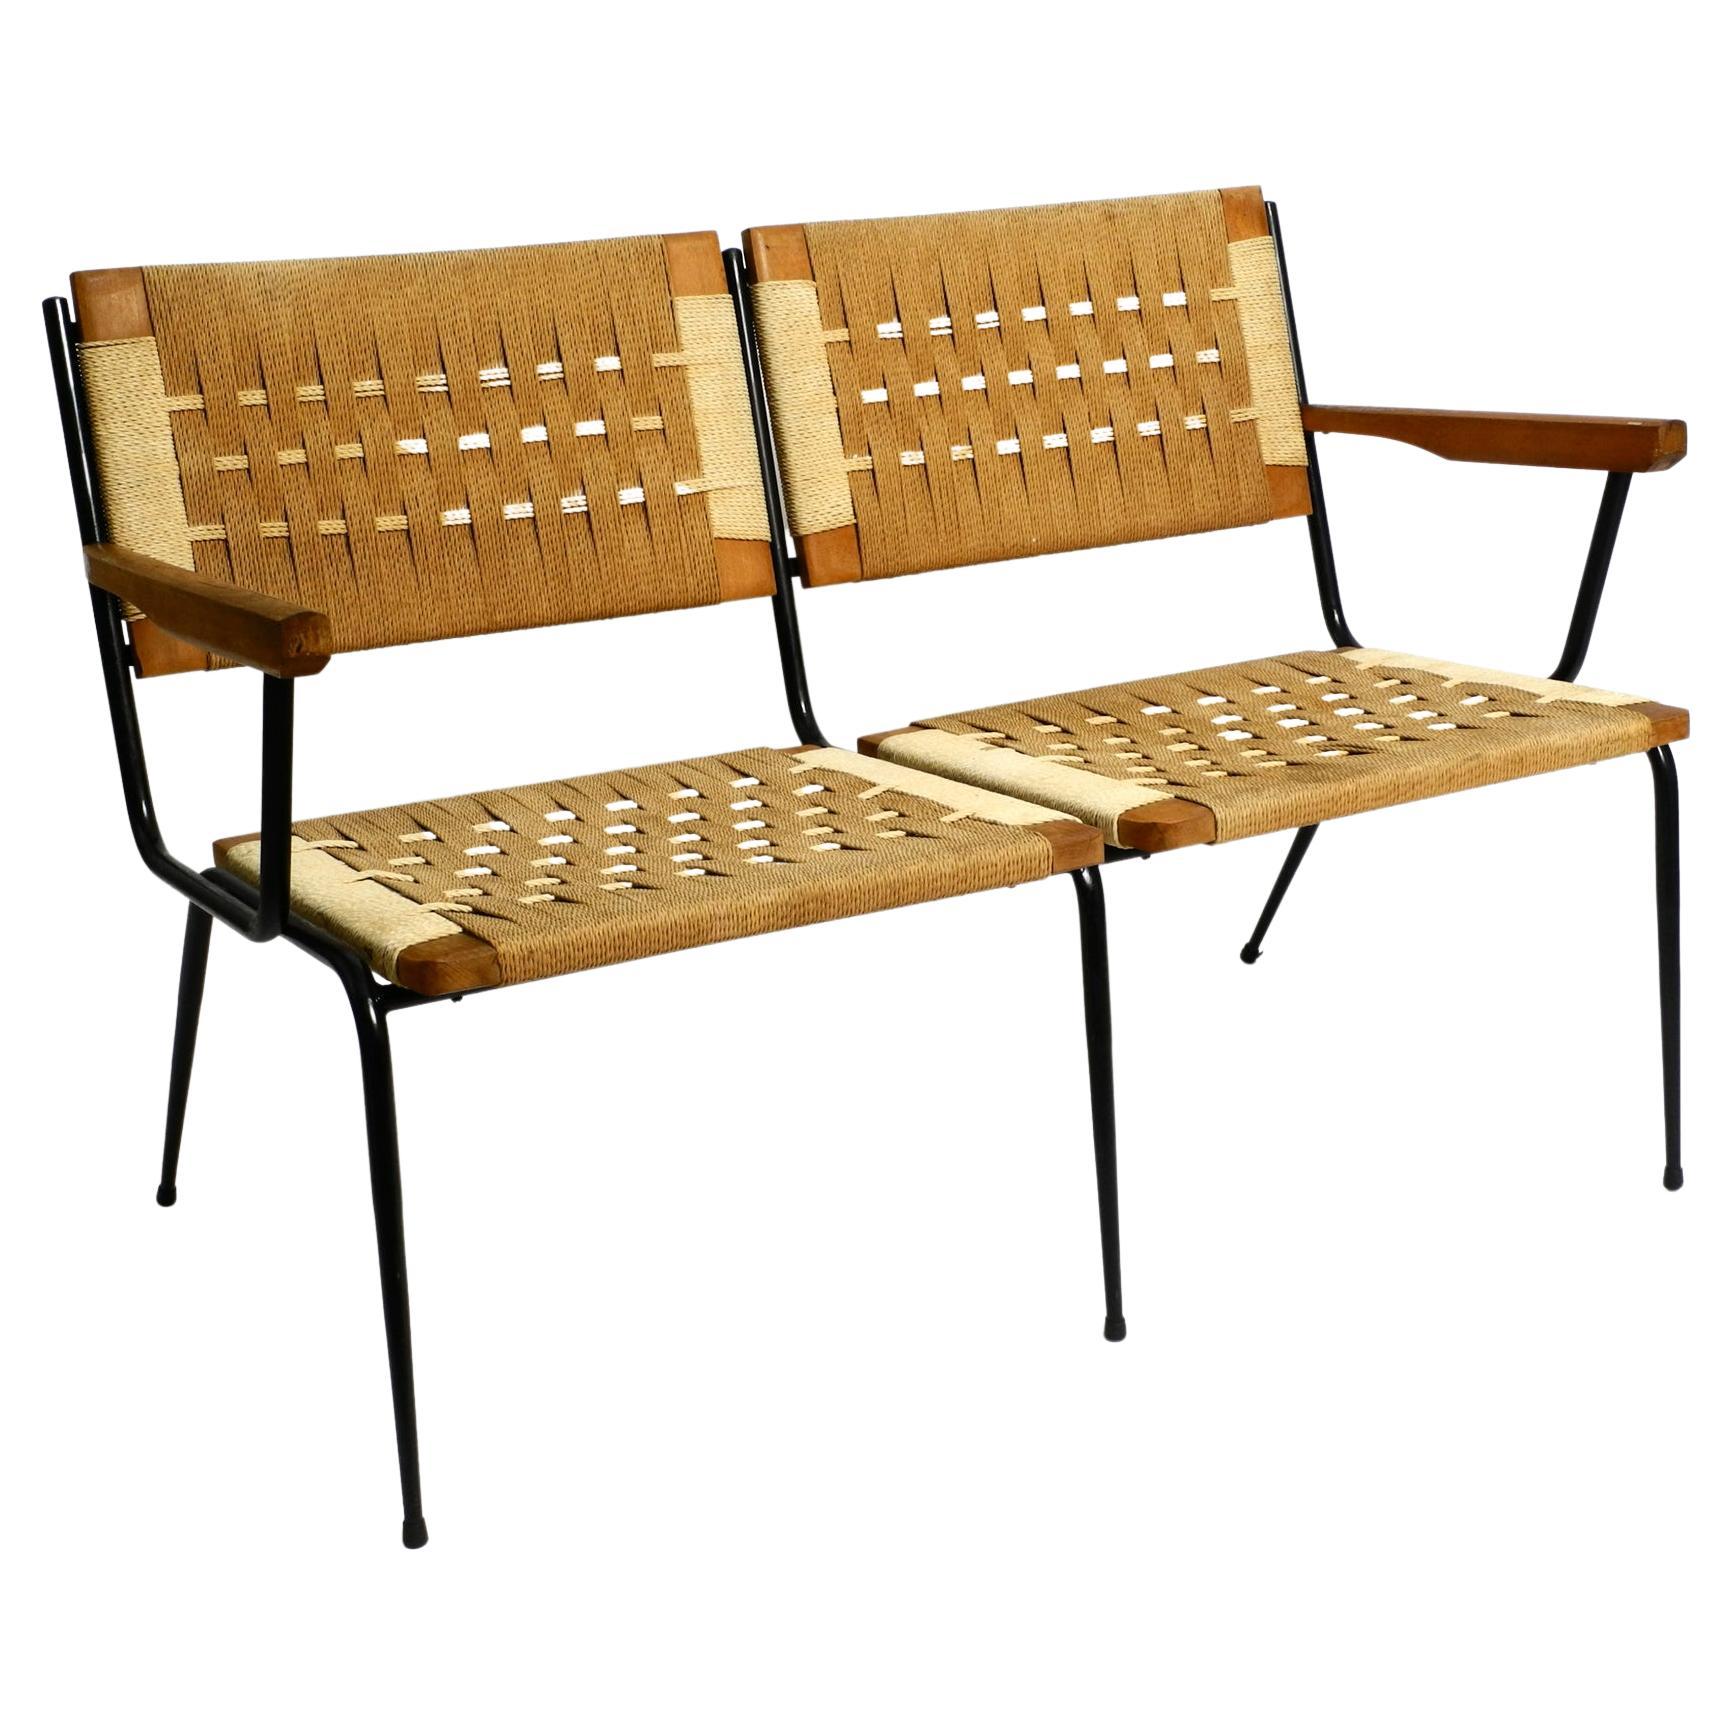 1950s Italian bench made of iron frame and rush wickerwork by Giuseppe Pagano For Sale